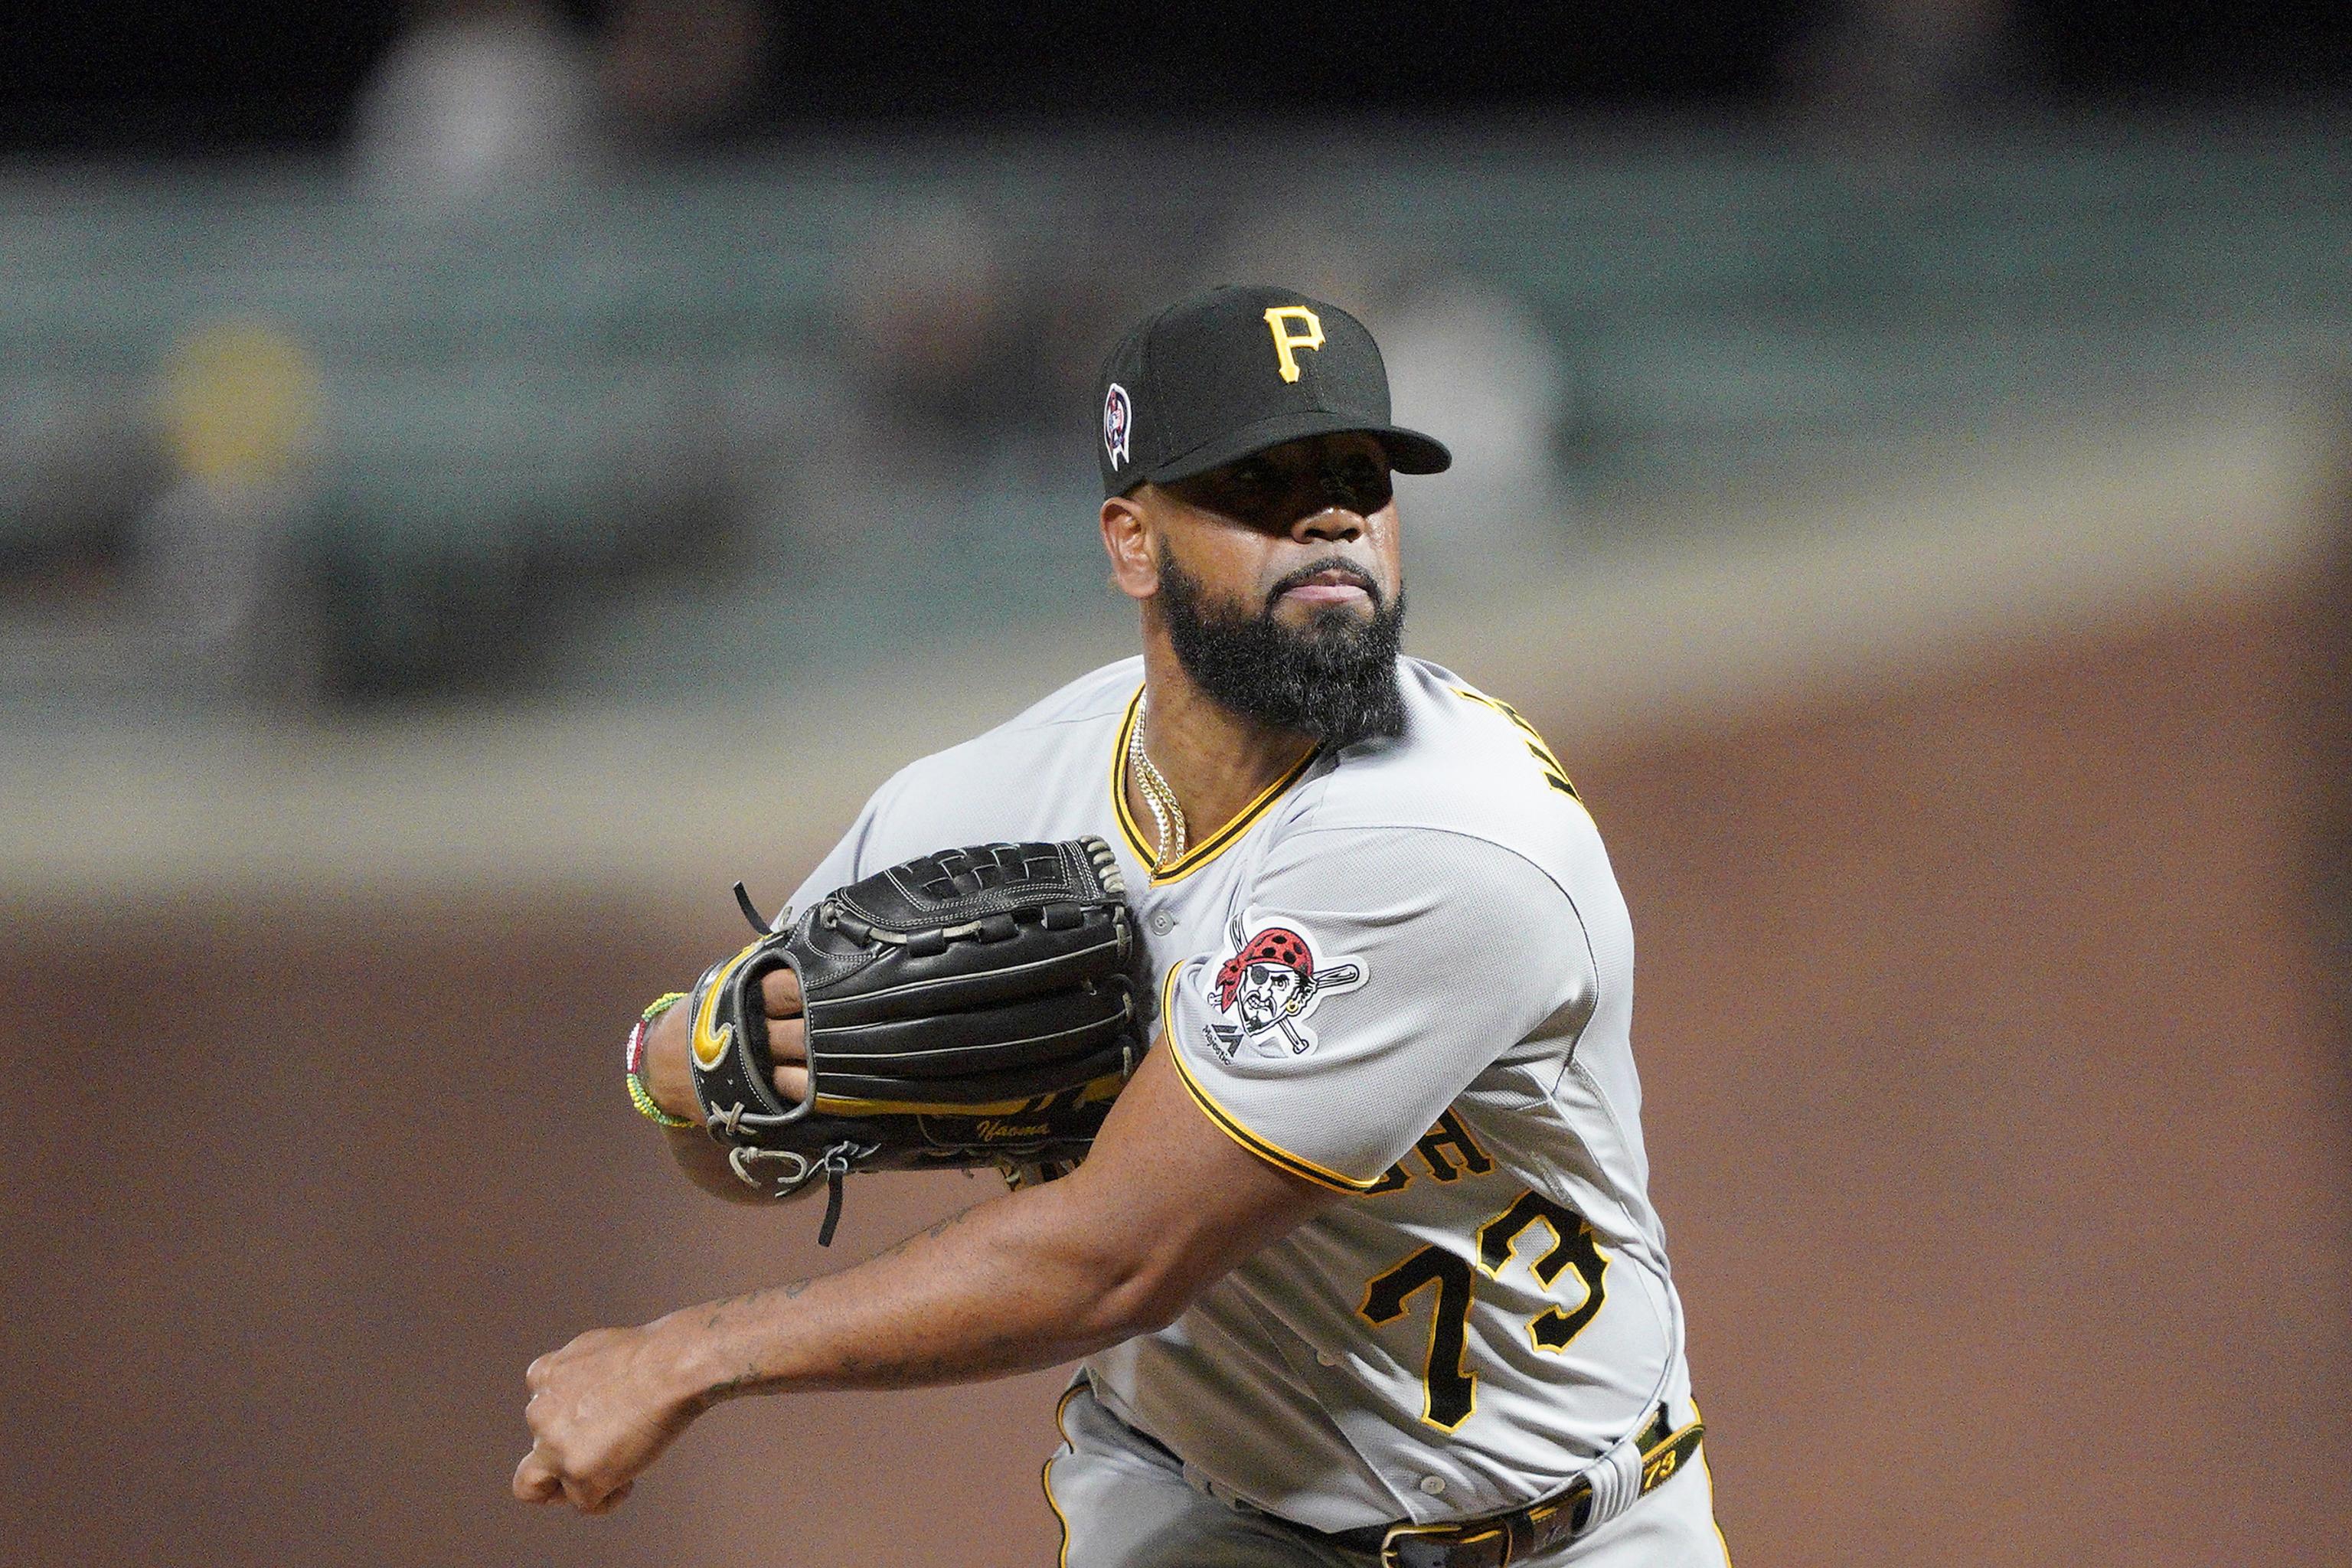 Pittsburgh Pirates relief pitcher Felipe Vazquez (73) in the ninth